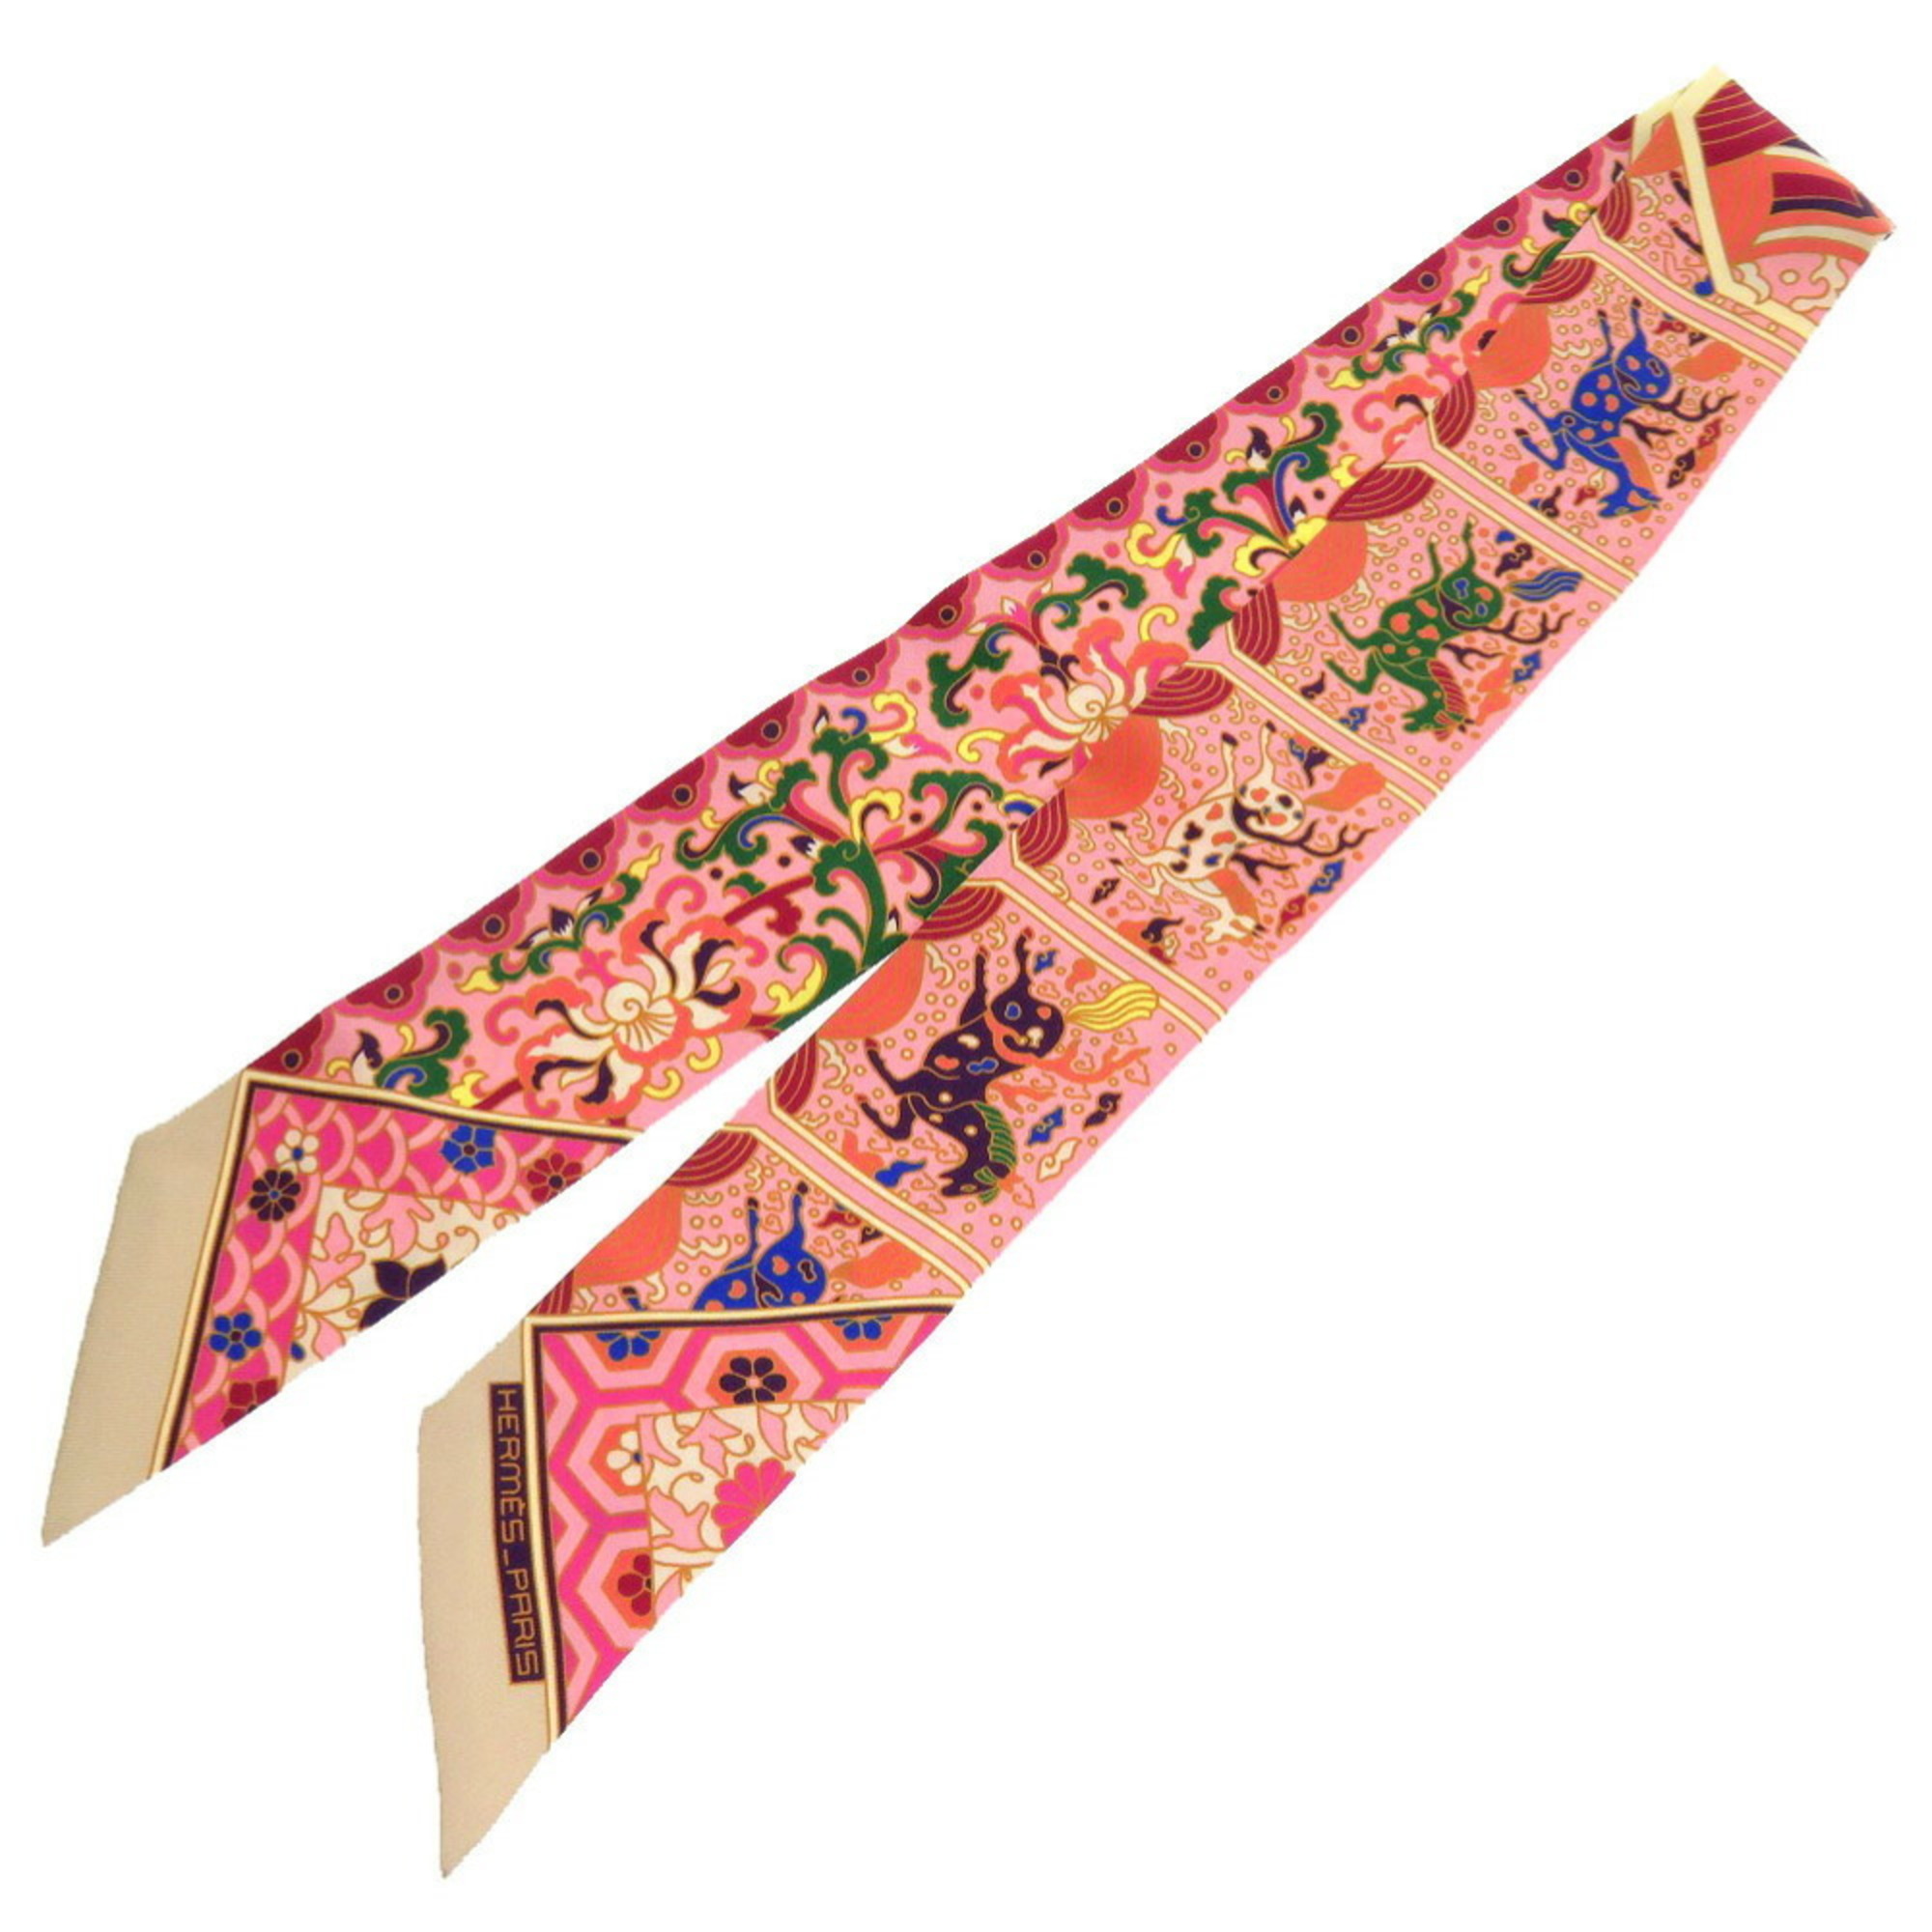 Hermes Twilly Royal Collection Scarf Muffler Pink 0185 HERMES